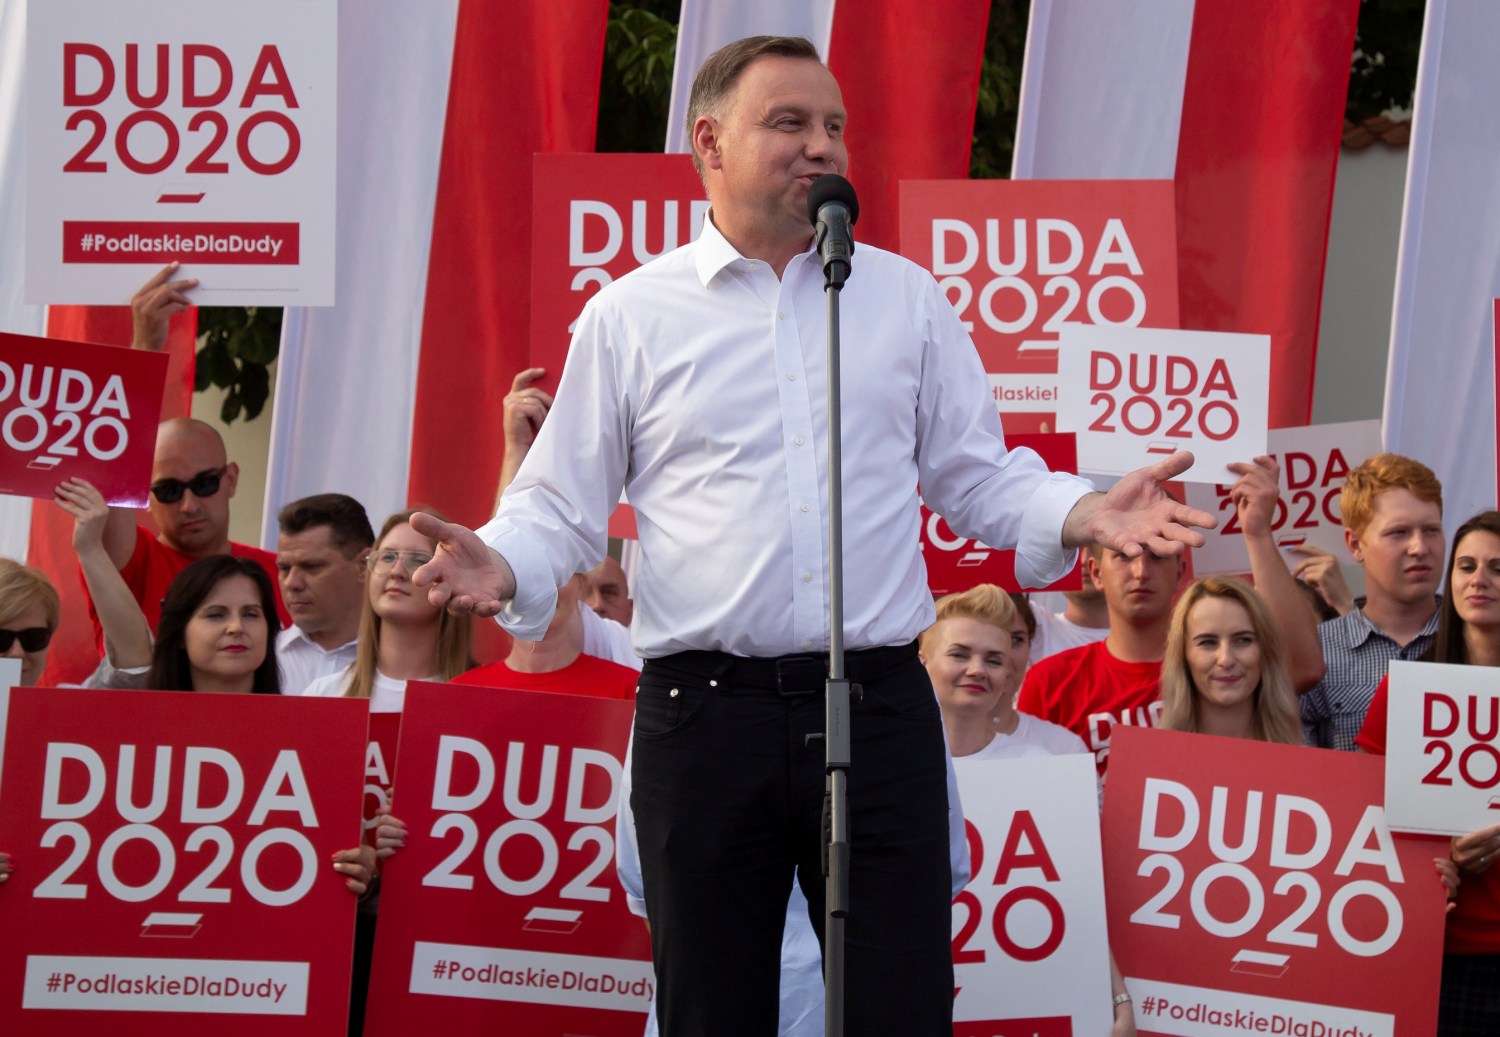 Polish President Andrzej Duda attends election rally in Bialystok, Poland June 20, 2020. Agnieszka Sadowska/Agencja Gazeta via REUTERS ATTENTION EDITORS - THIS IMAGE WAS PROVIDED BY A THIRD PARTY. POLAND OUT. NO COMMERCIAL OR EDITORIAL SALES IN POLAND